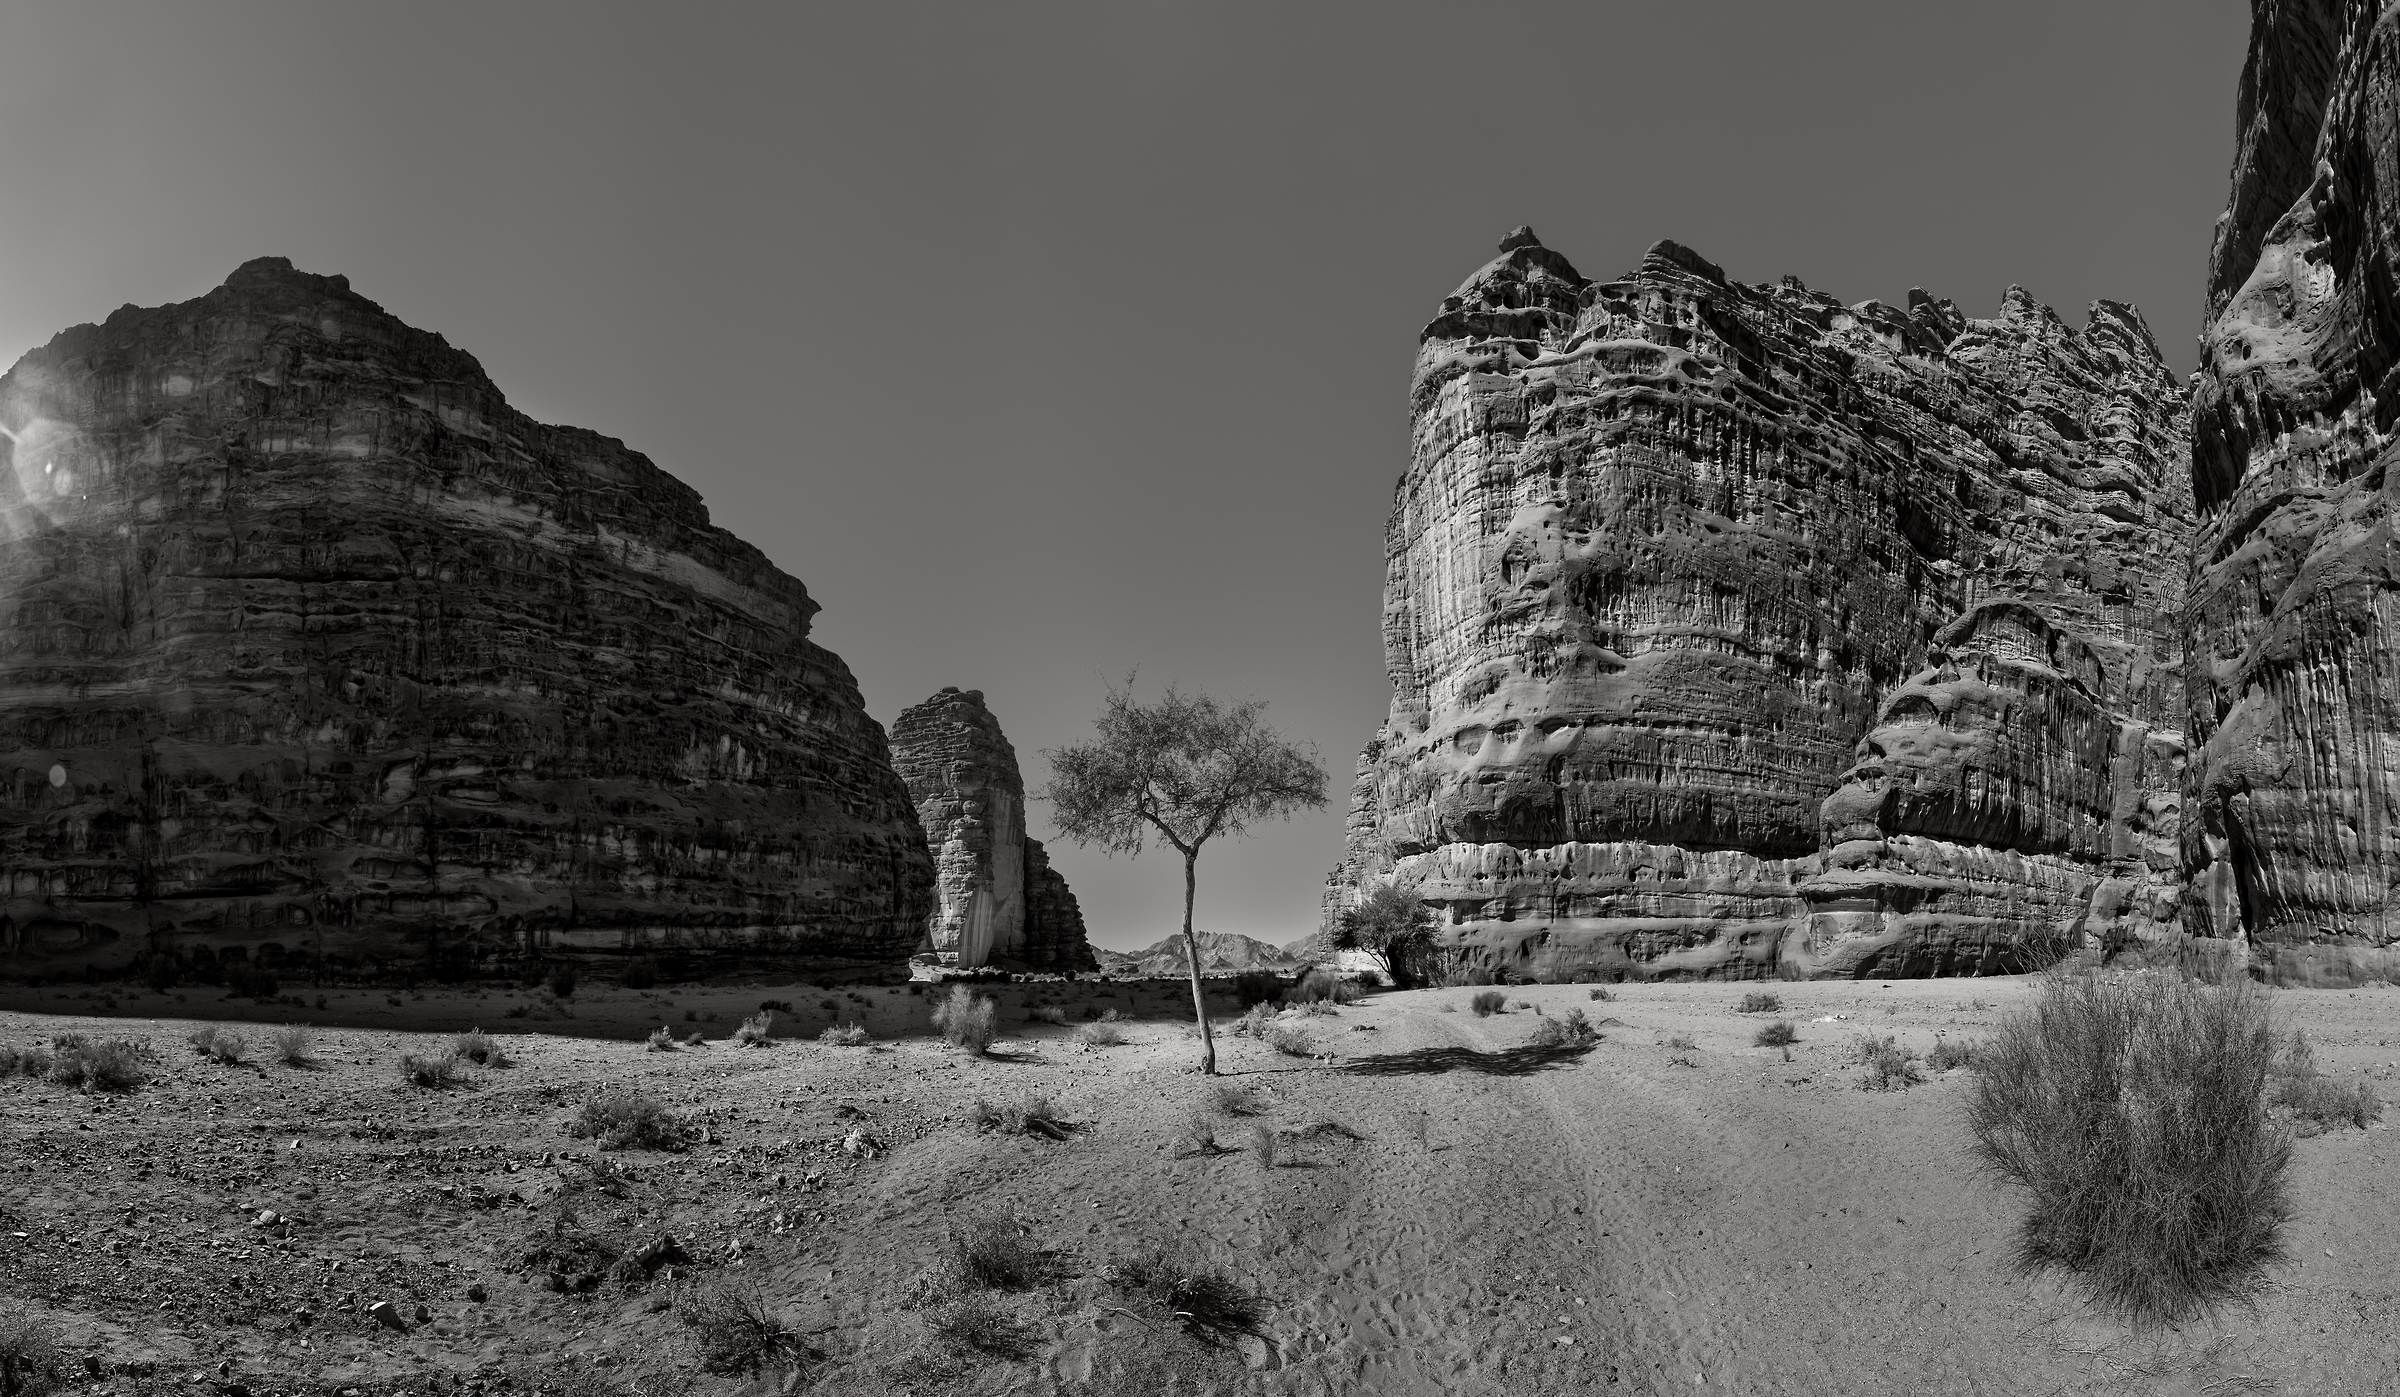 1,194 megapixels! A very high resolution, large-format VAST photo print of a tree in a canyon; photograph created by Peter Rodger in Neom, Tabuk, Saudi Arabia.